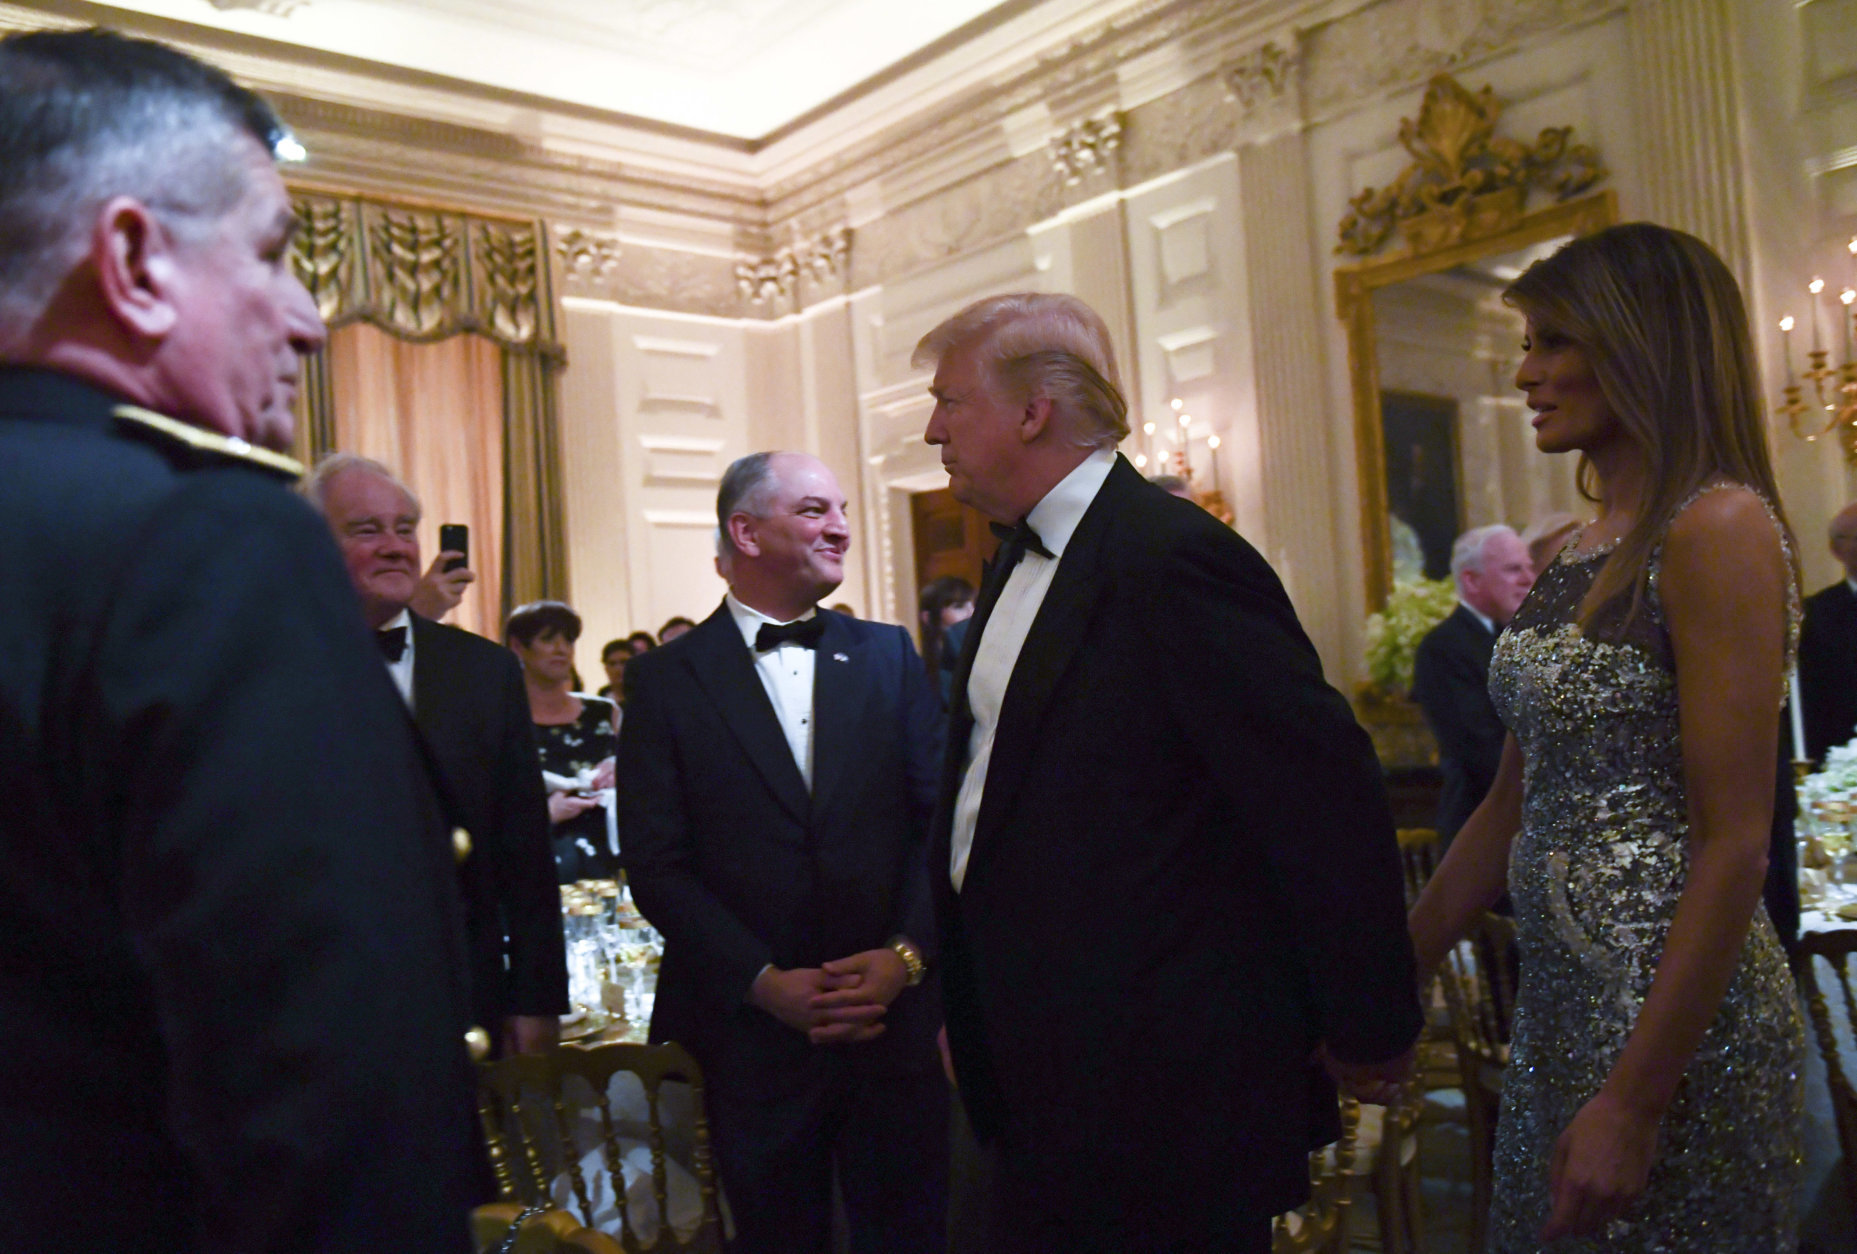 President Donald Trump, center, and first lady Melania Trump, right, walk into the State Dining Room to attend a State Dinner with French President Emmanuel Macron at the White House in Washington, Tuesday, April 24, 2018. (AP Photo/Susan Walsh)